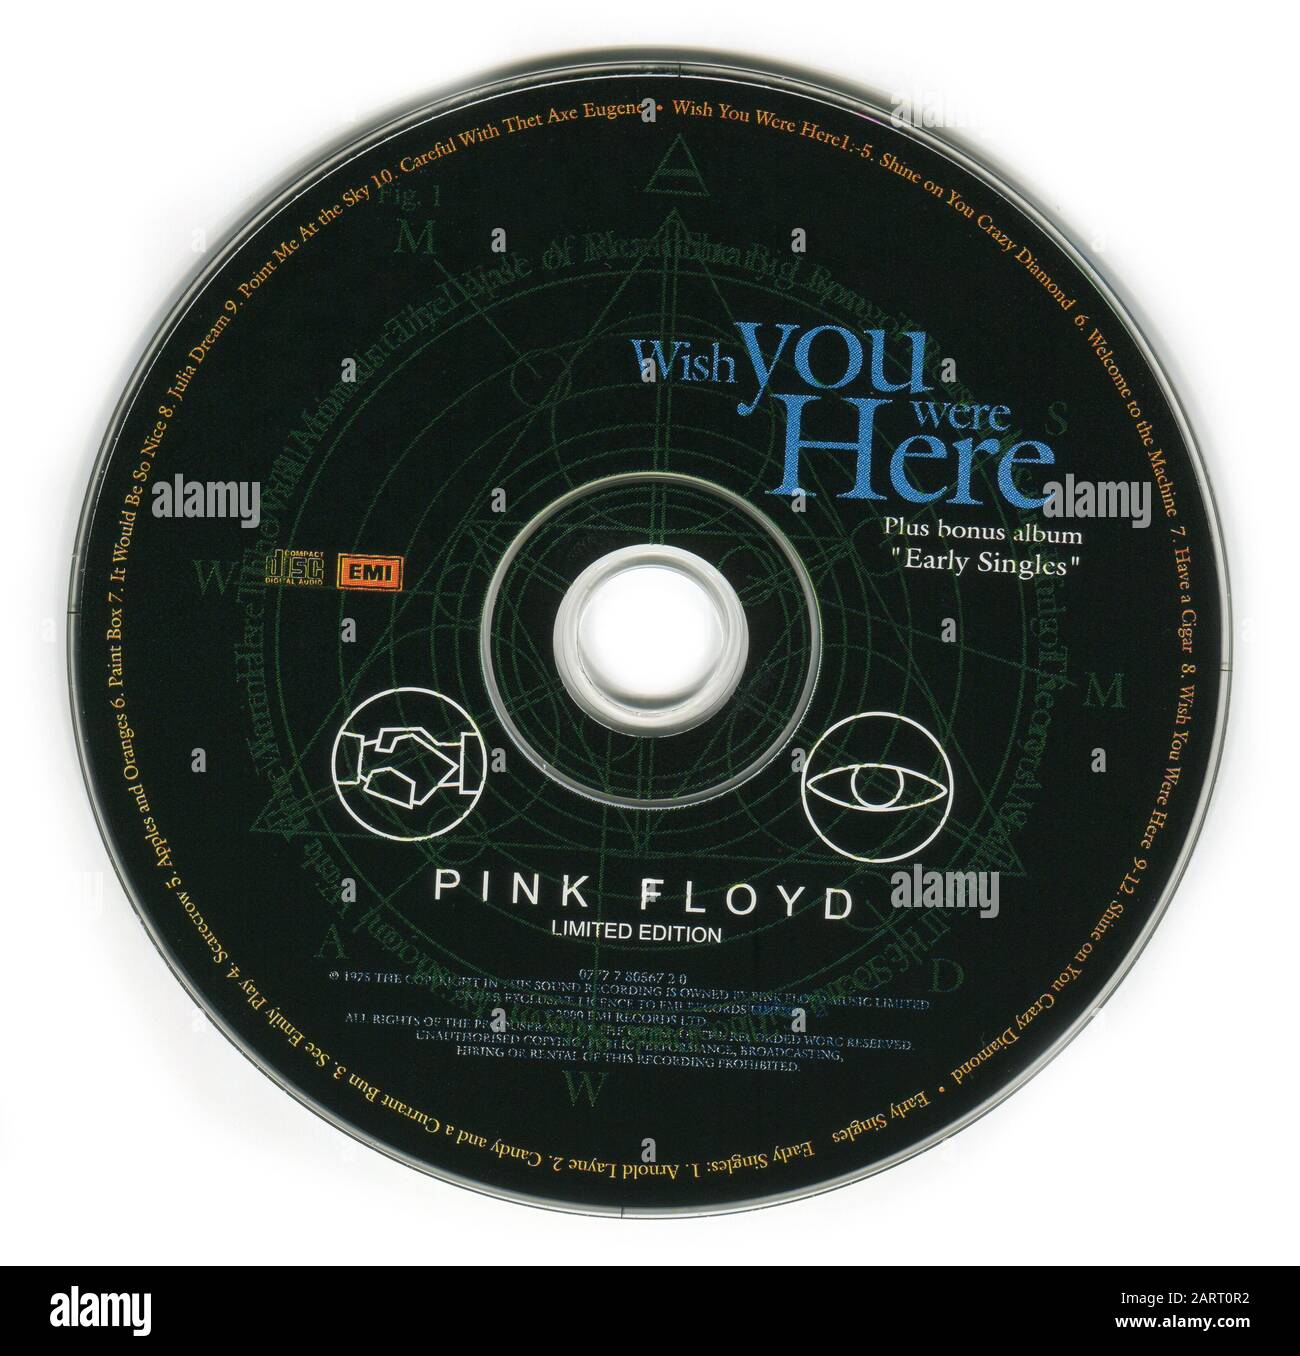 https://c8.alamy.com/comp/2ART0R2/cd-pink-floyd-wish-you-were-here-limited-edition-released-on-emi-records-on-2000-2ART0R2.jpg